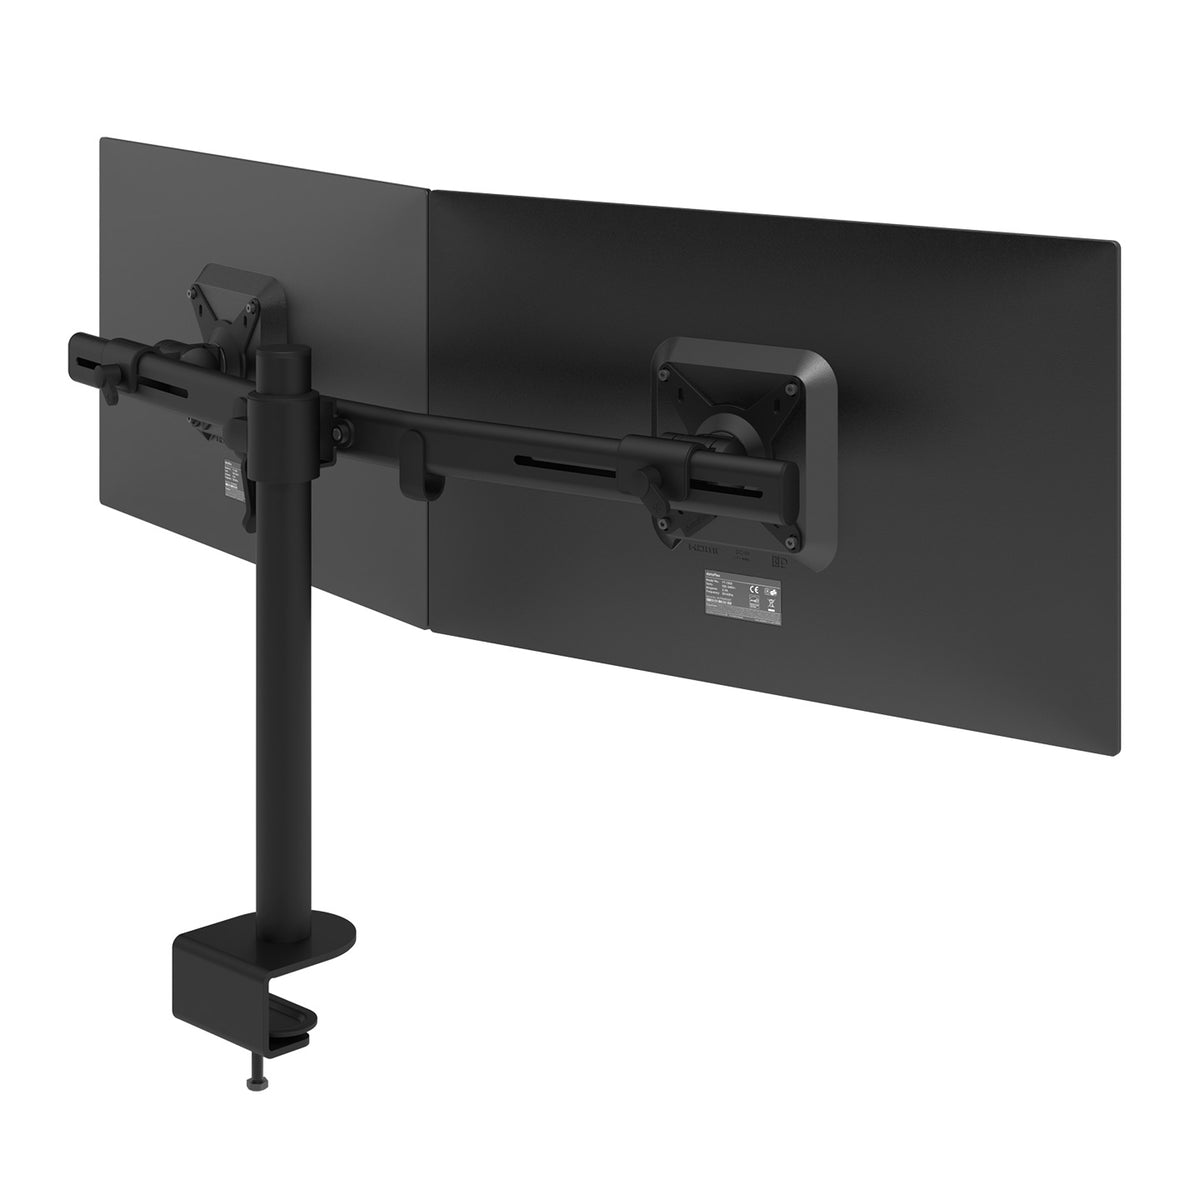 Viewmate monitor arm - desk